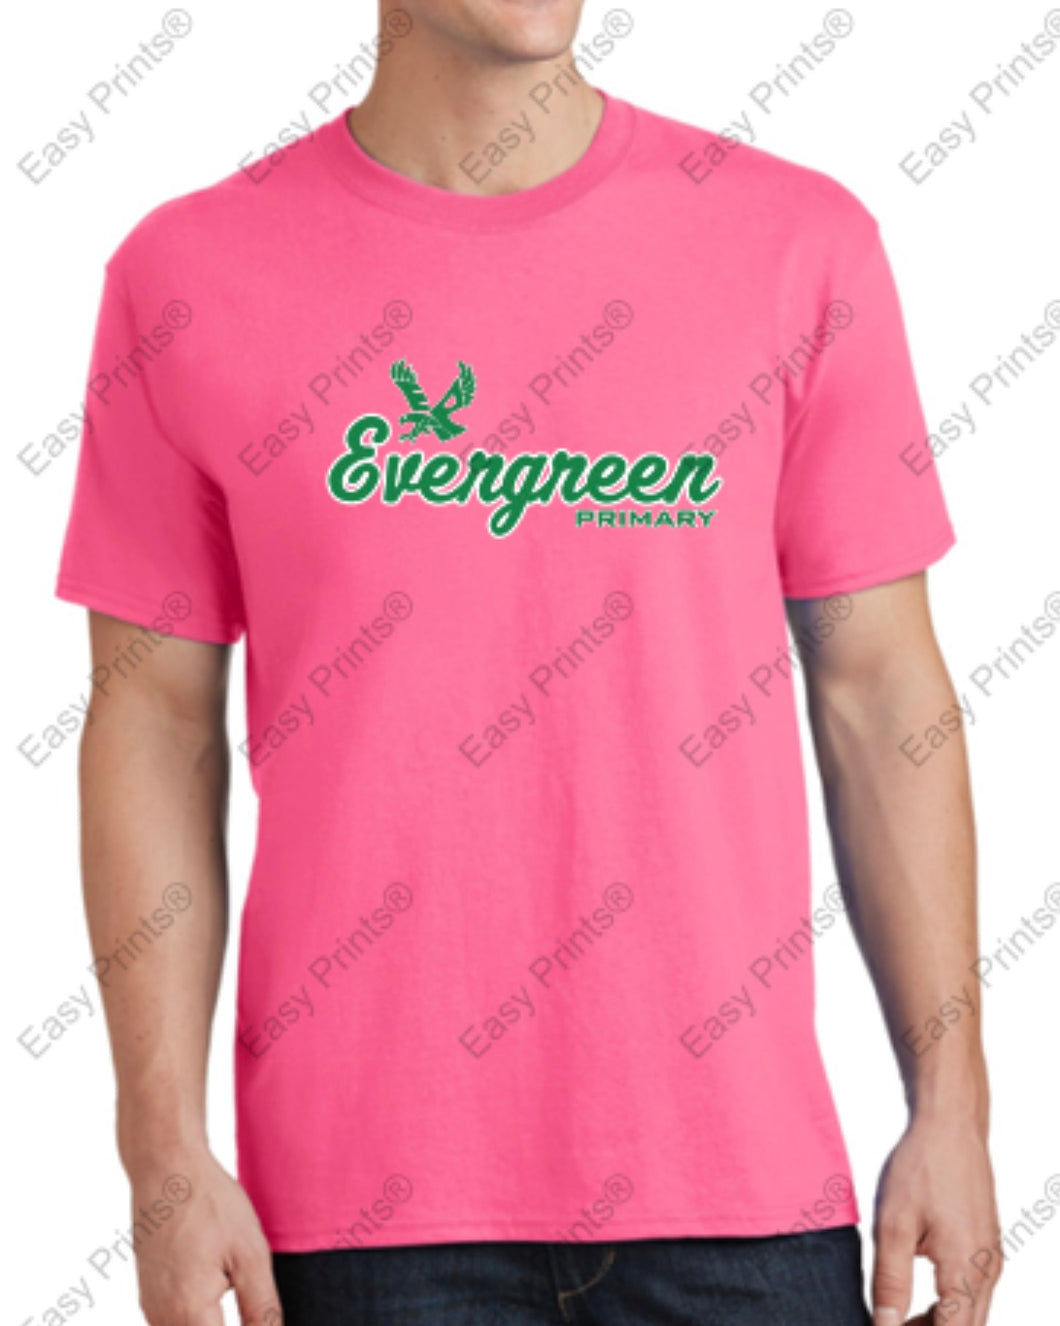 Evergreen Primary T-Shirt Youth and Adult